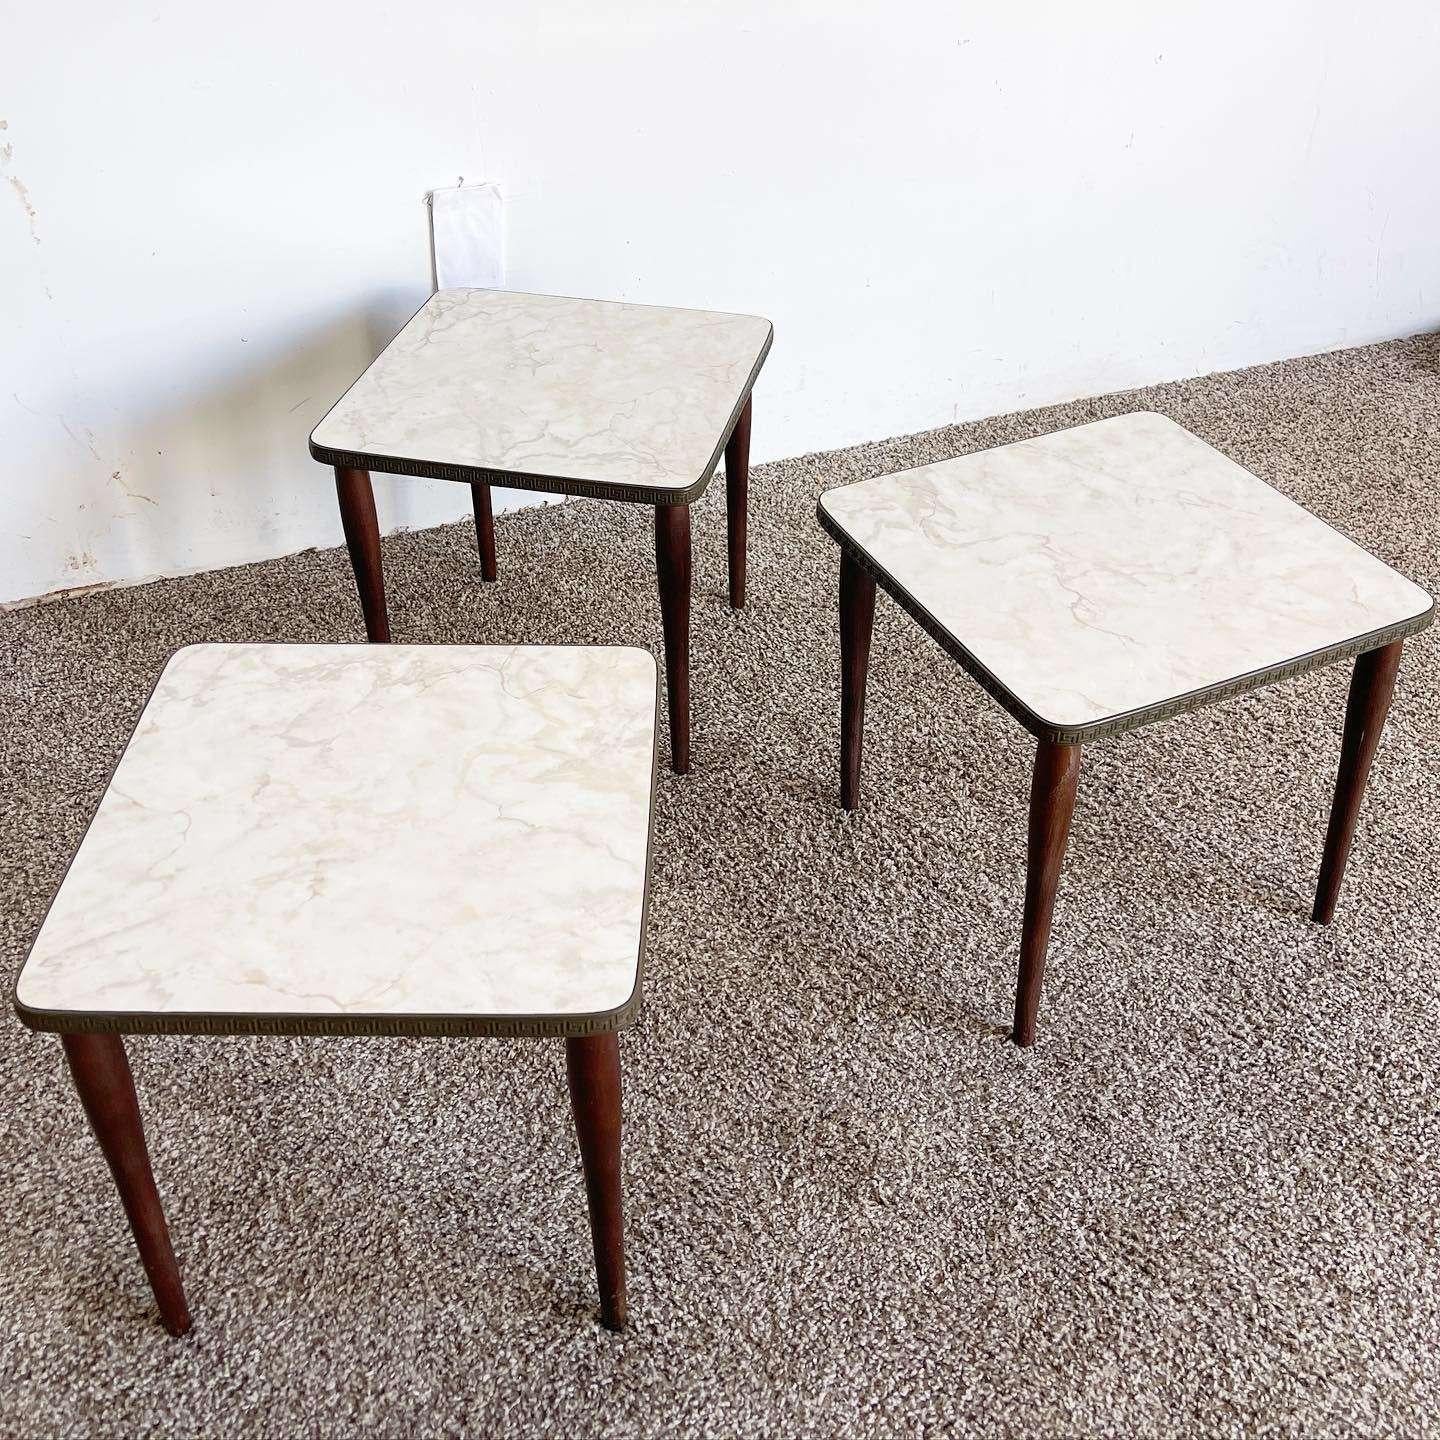 Late 20th Century Mid Century Modern Square Stacking/Nesting Tables For Sale